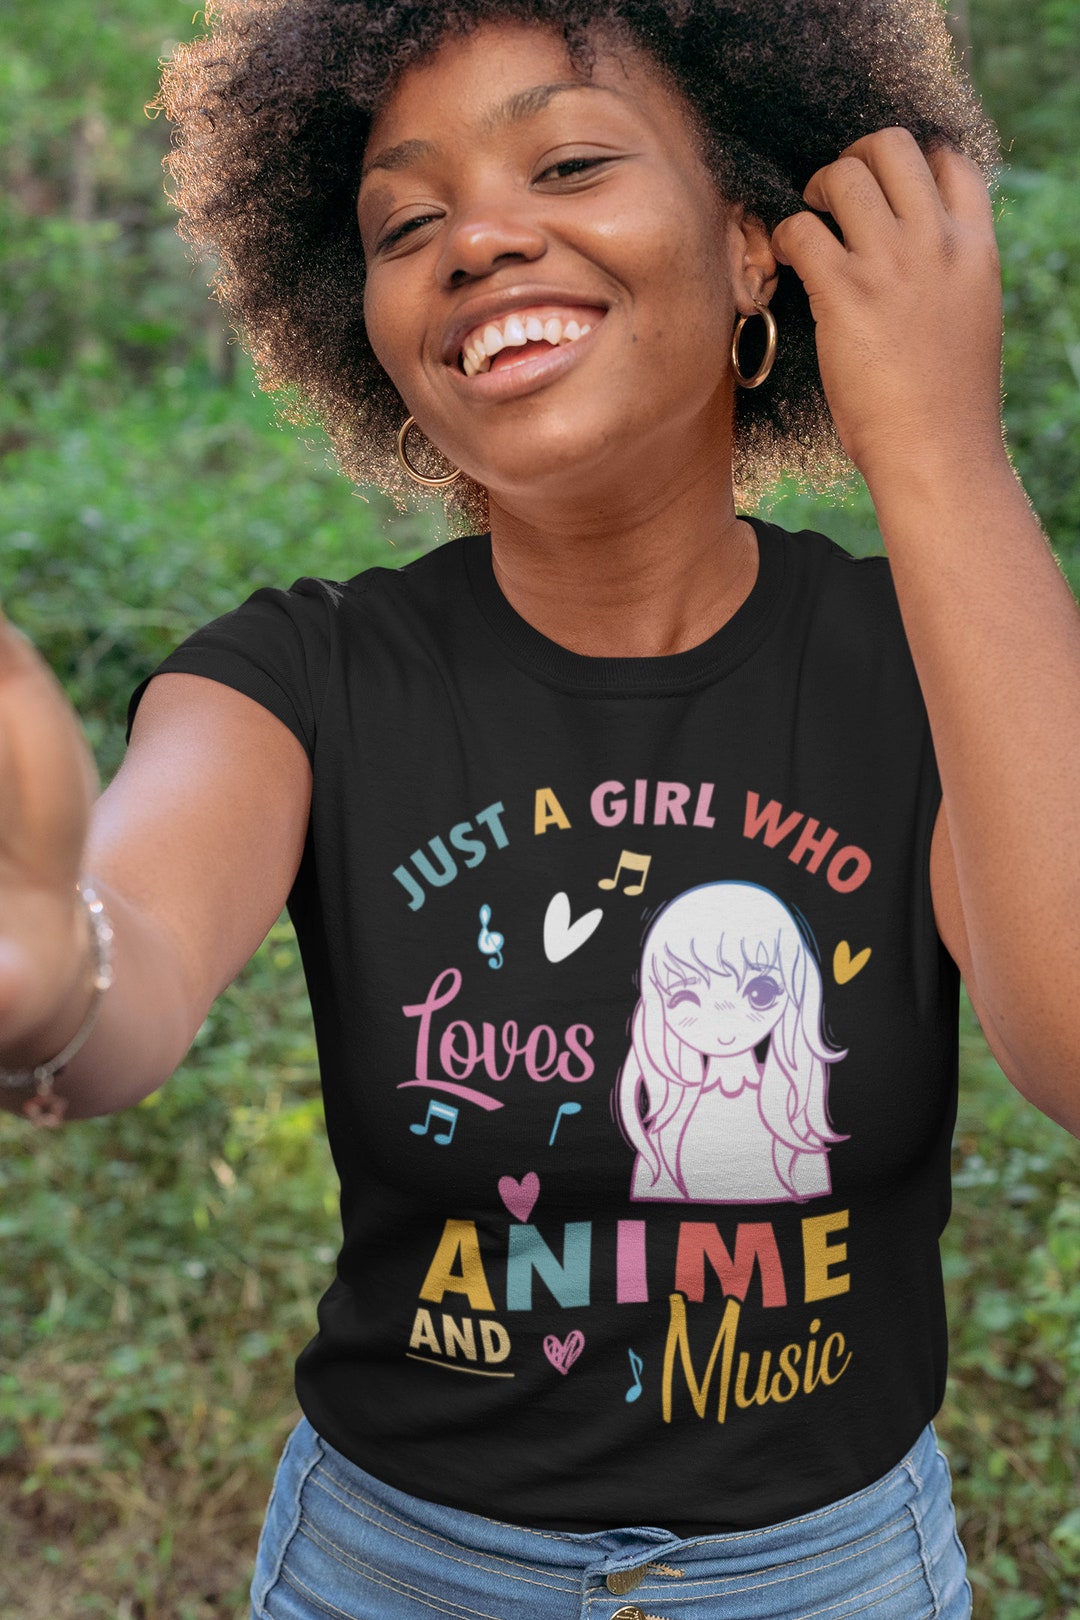 Just A Girl Who Really Loves Anime and Music Costume Shirt - Etsy